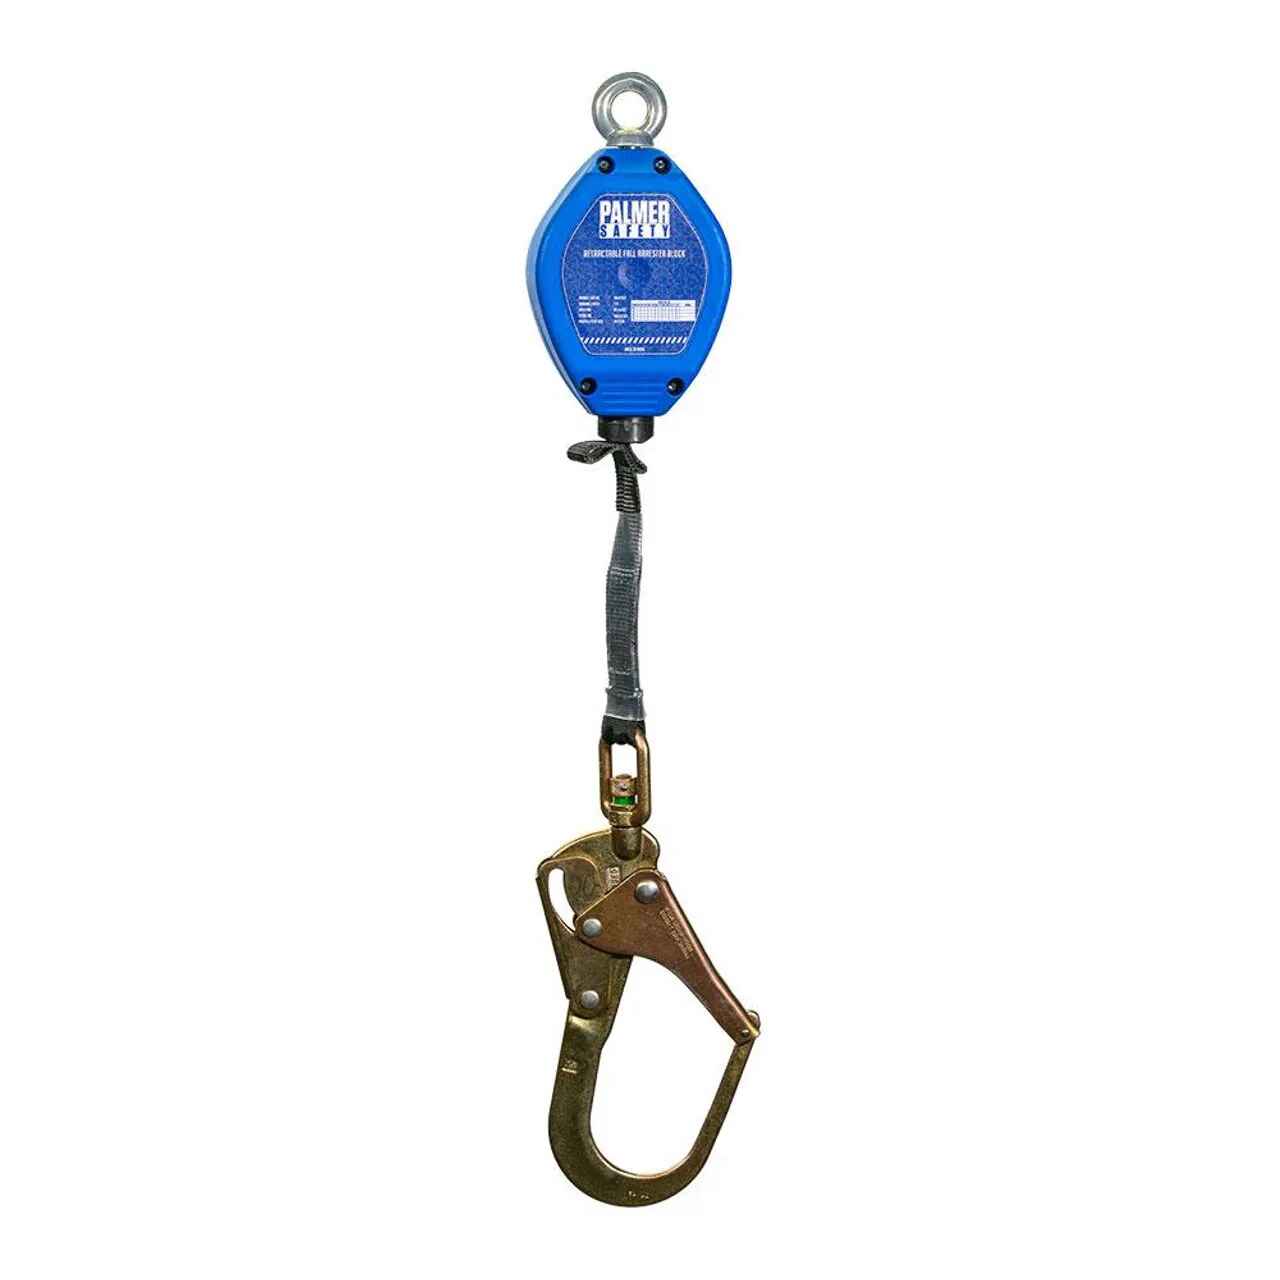 6' Self Retracting Lifeline Descent Device with Small Hook SRL421321 - Defender Safety